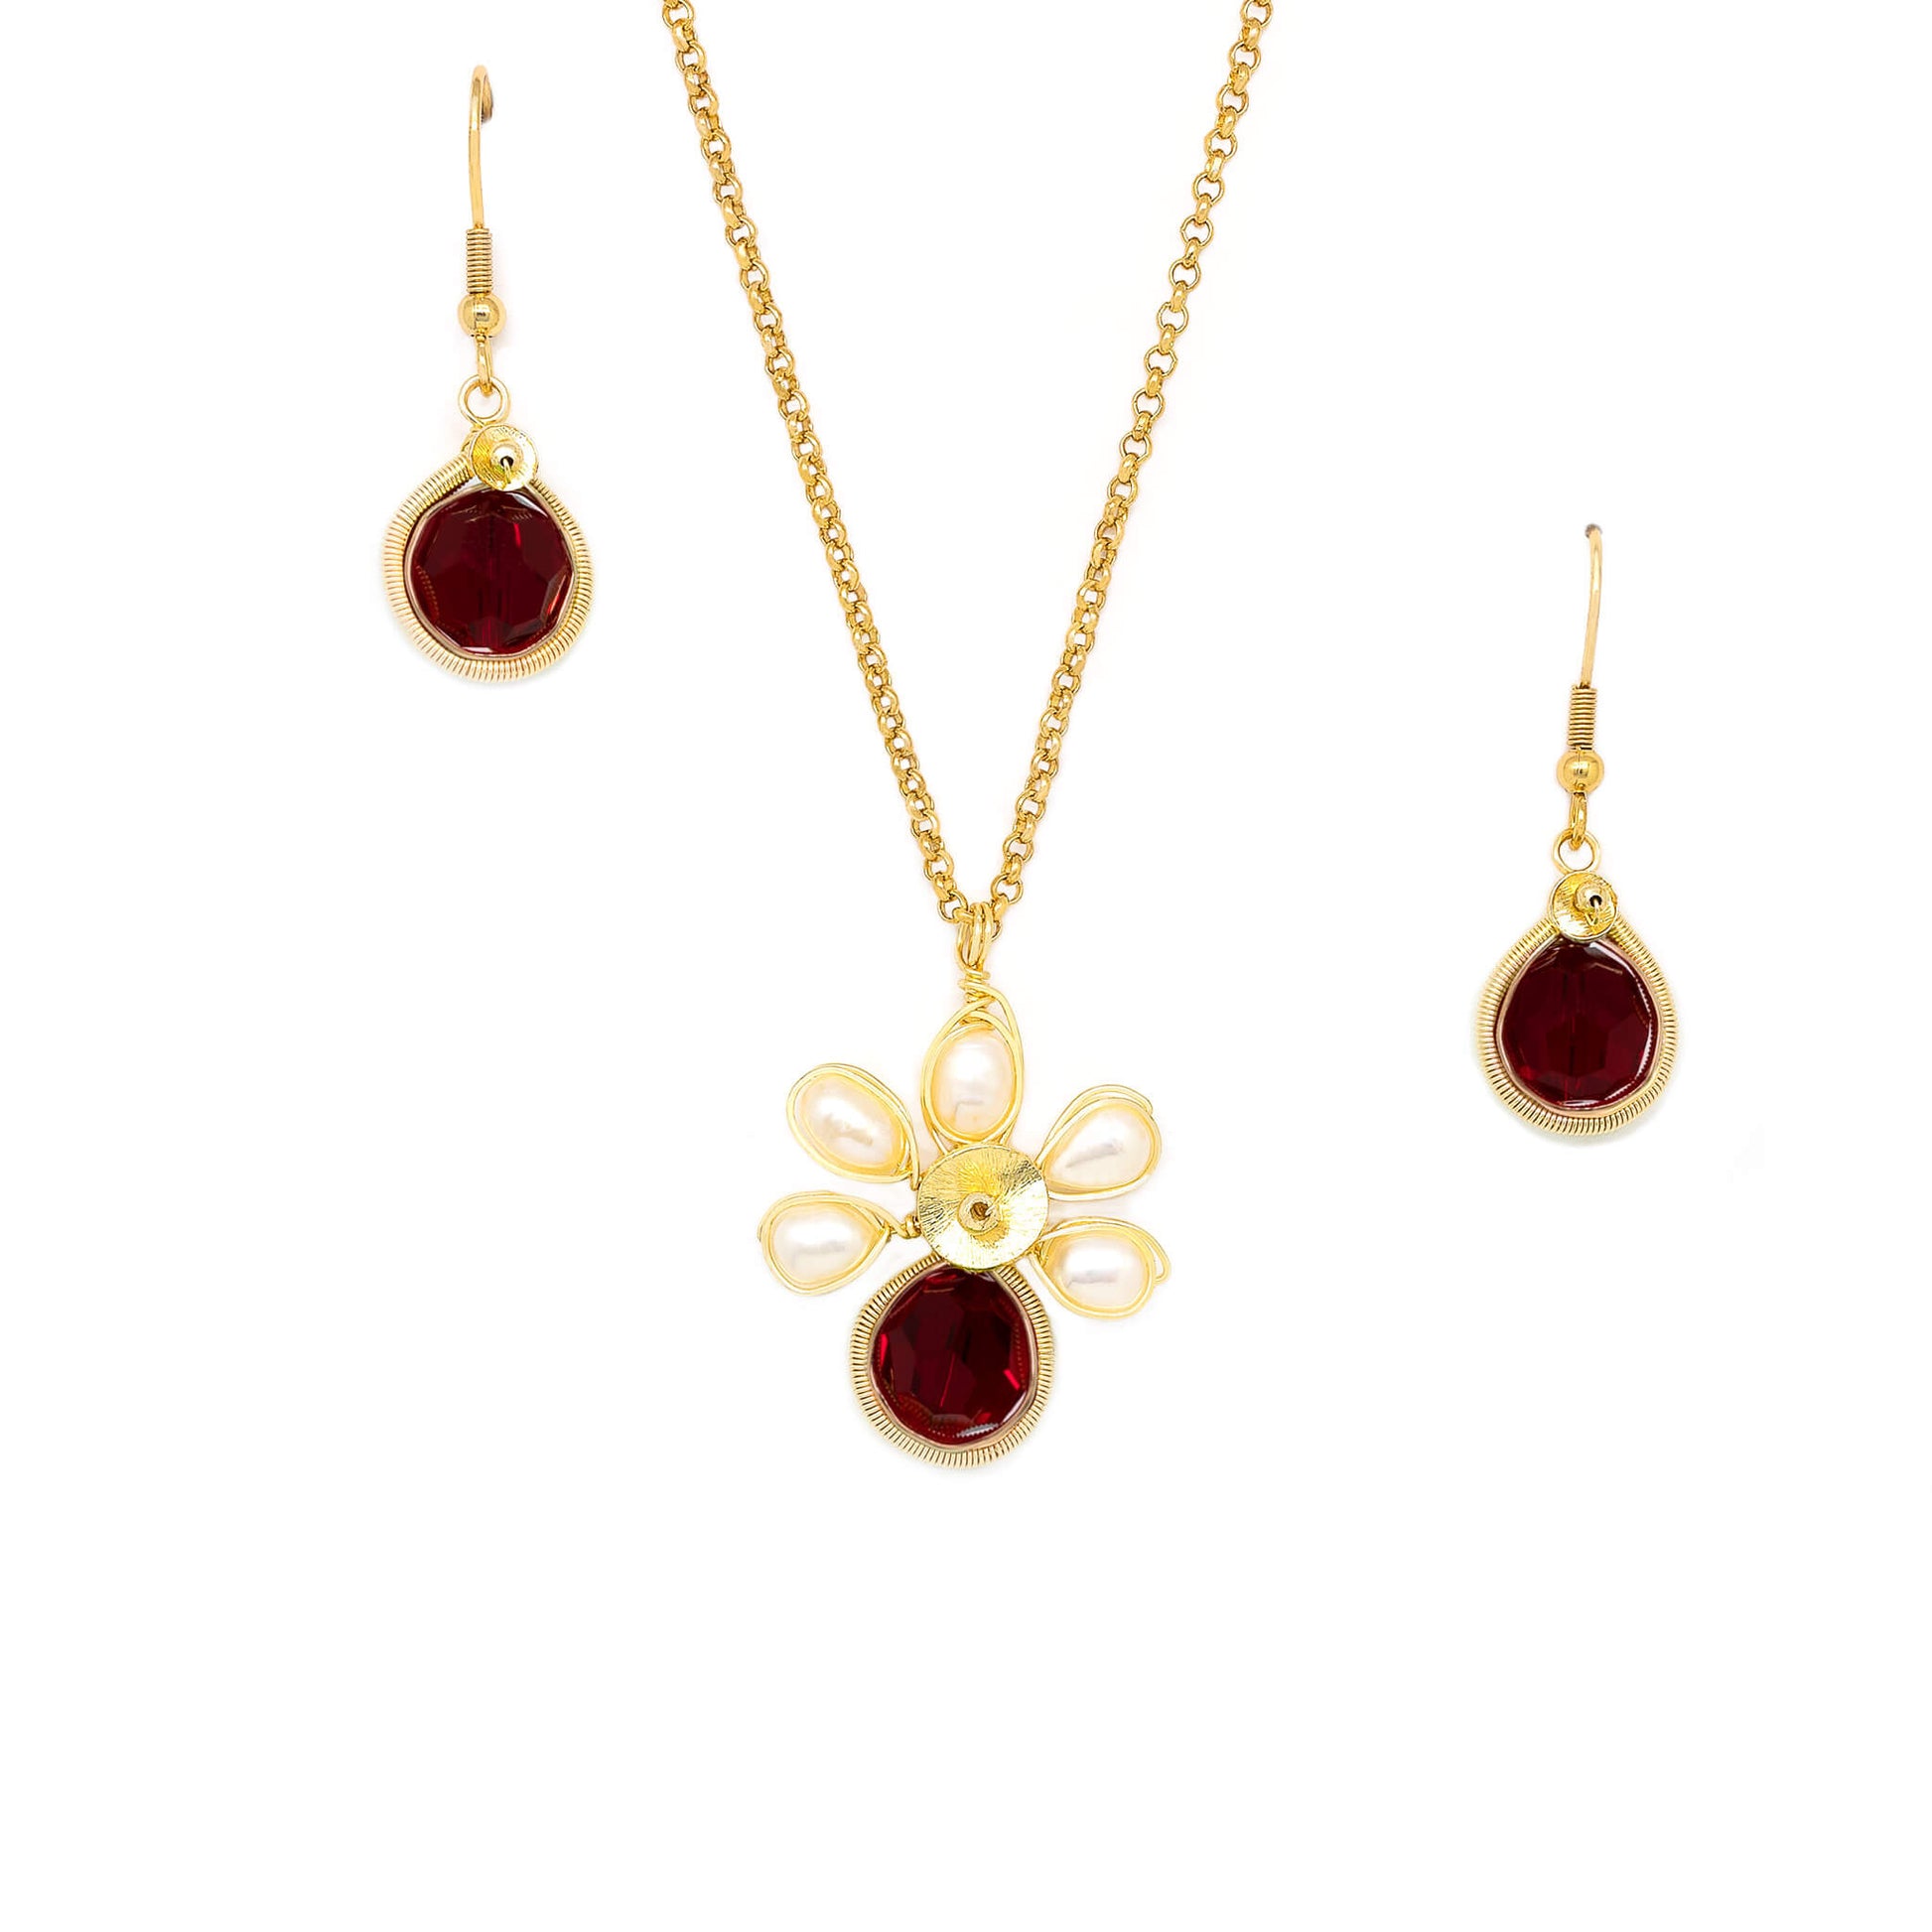 January Birthstone Crystal Necklace.-Earrings Set. Dark Red Crystals, Fresh Water Pearls  and Gold Set. 22K Gold Plated Chain. 